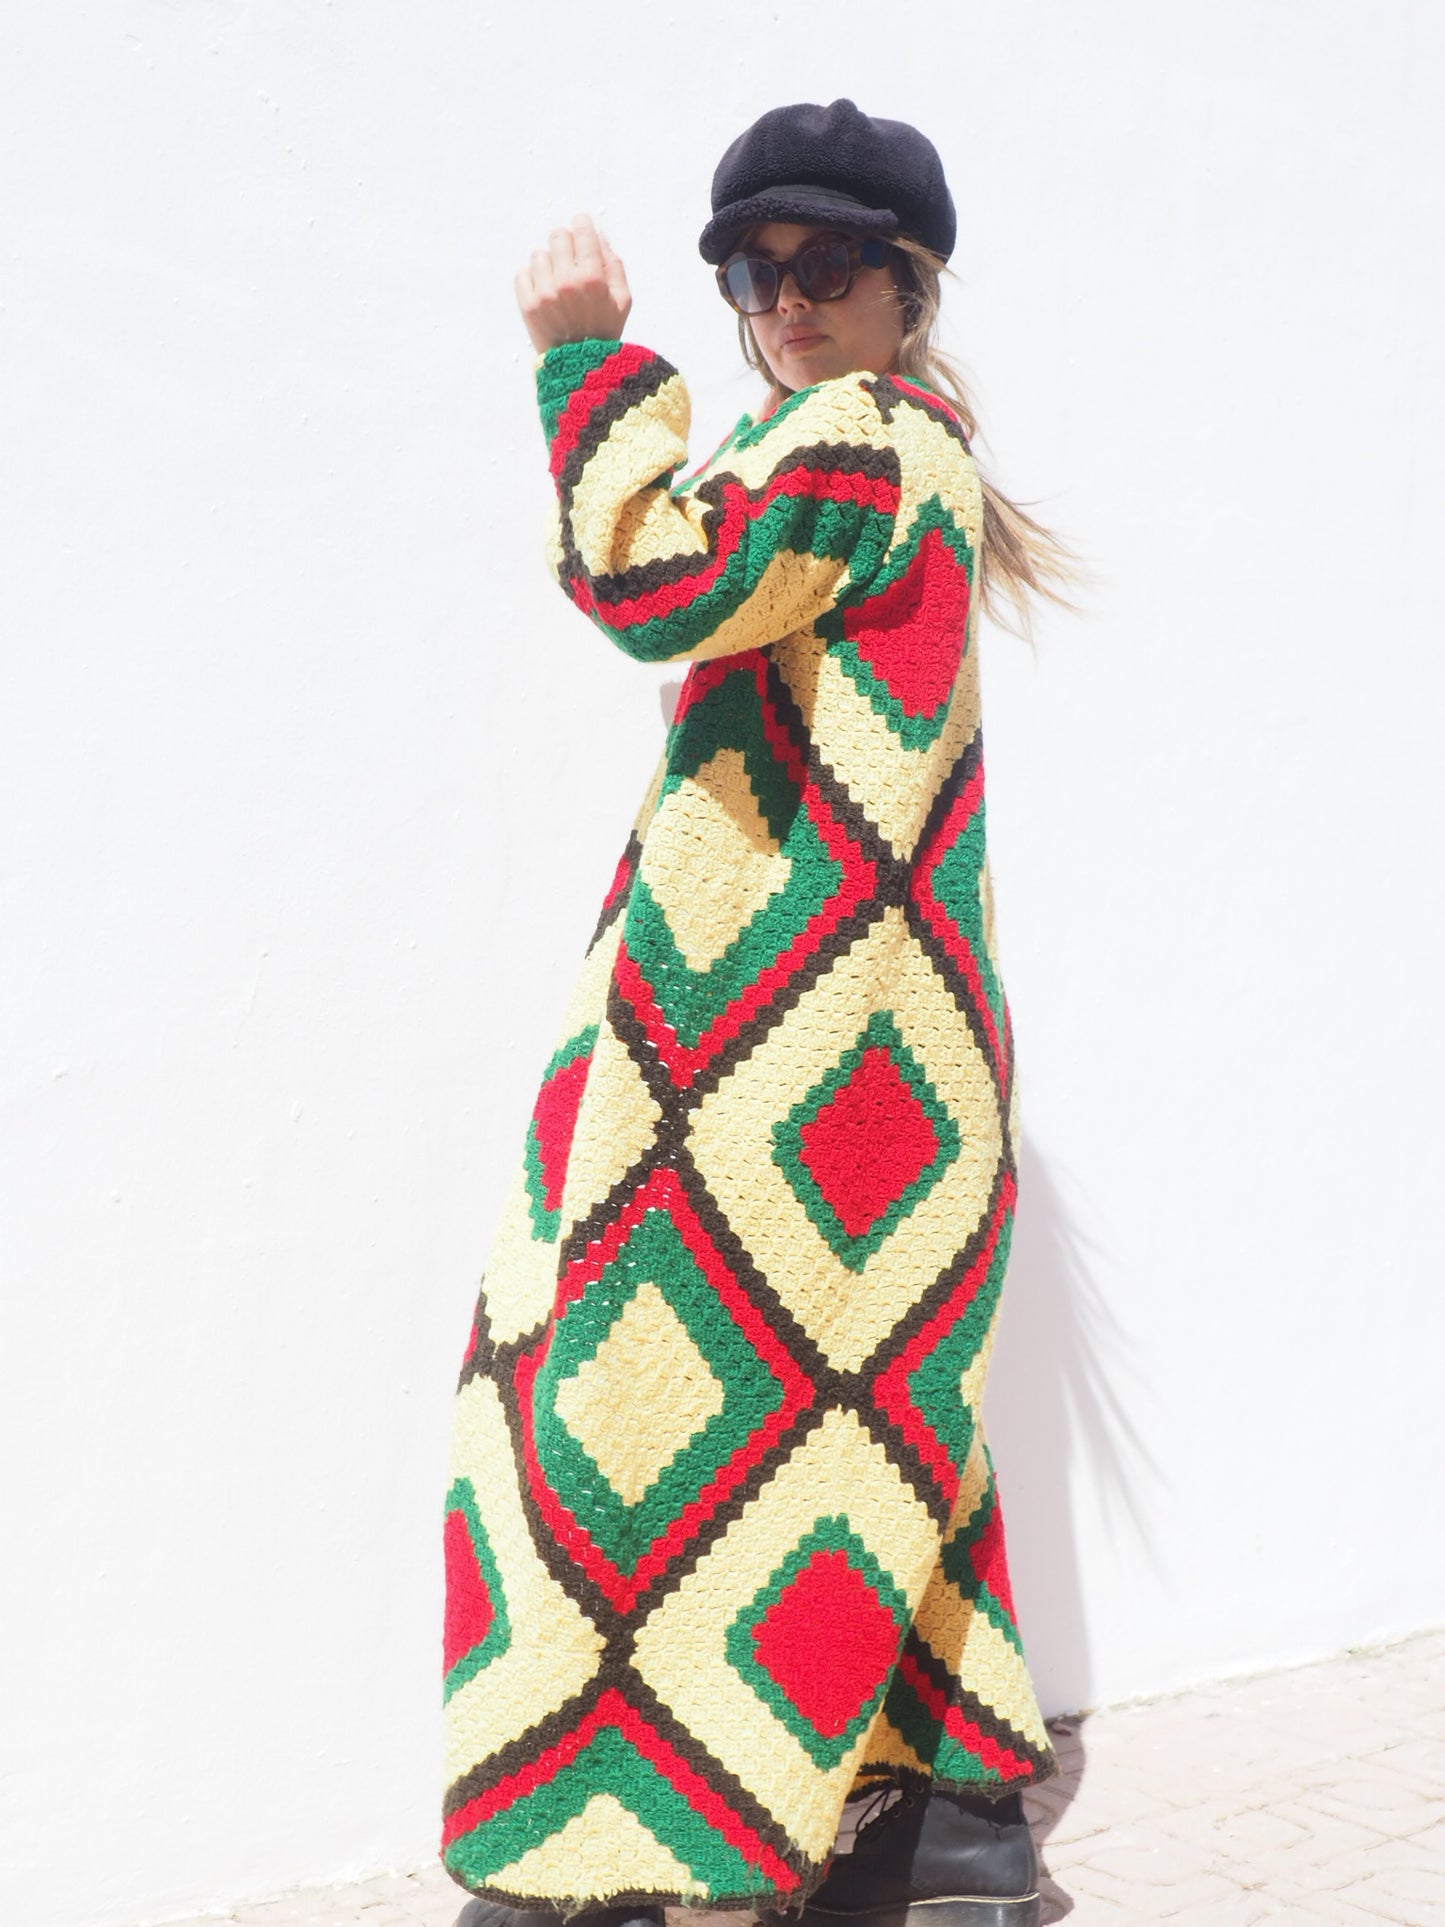 Very colourful handmade vintage crochet jacket by up-cycled by Vagabond Ibiza.